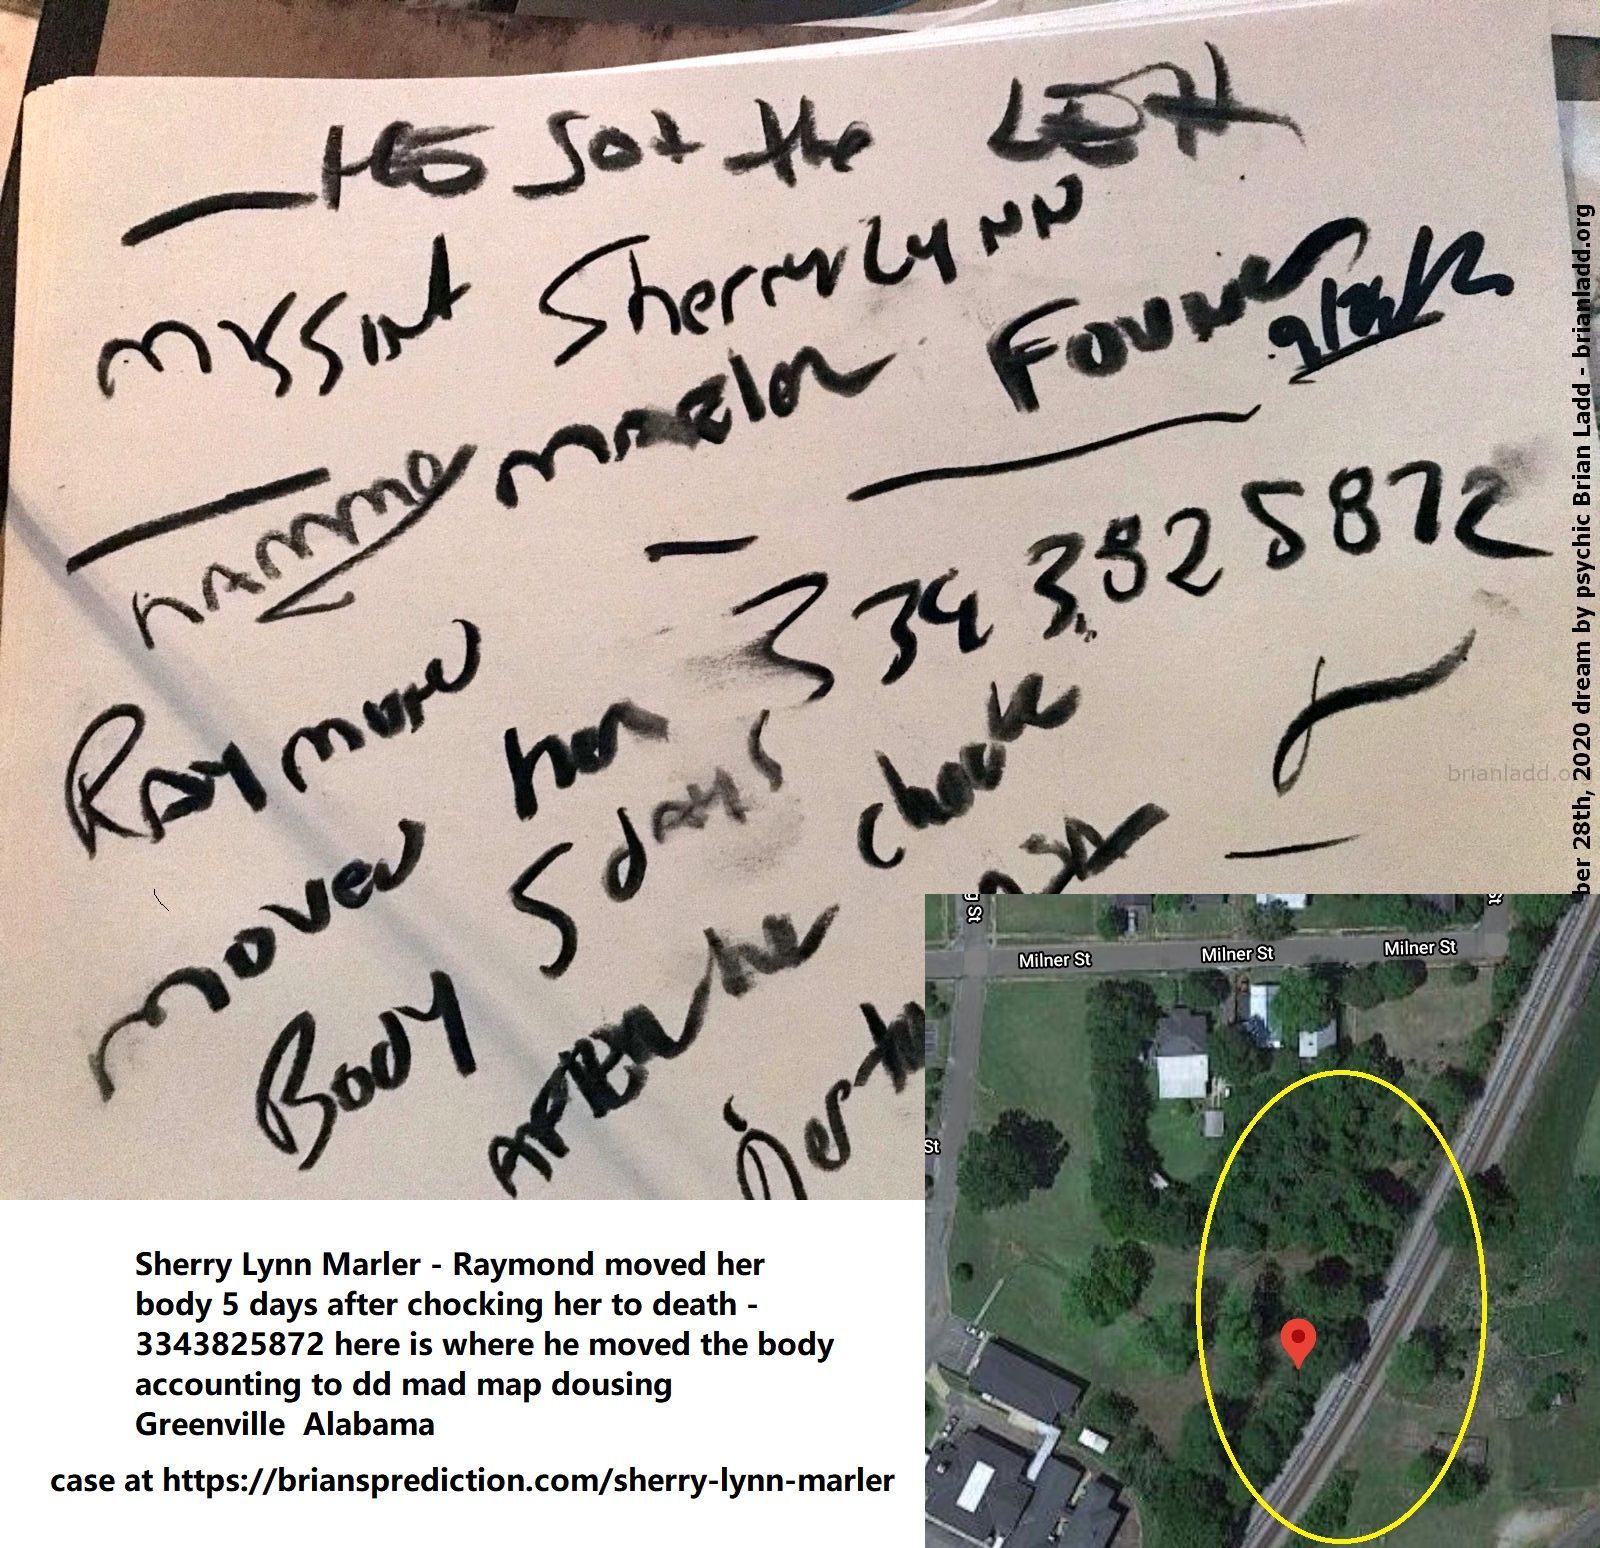 Sherry Lynn Marler Raymond Moved Her Body 5 Days After Chocking Her To Death 3343825872 Here Is Where He Moved The Body ...
Sherry Lynn Marler Found - Raymond Moved Her Body 5 Days After Chocking Her To Death - 3343825872 Here Is Where He Moved The Body Accounting To Dd Mad Map Dousing  Greenville  Alabama  Case At   https://briansprediction.com/Sherry-Lynn-Marler
